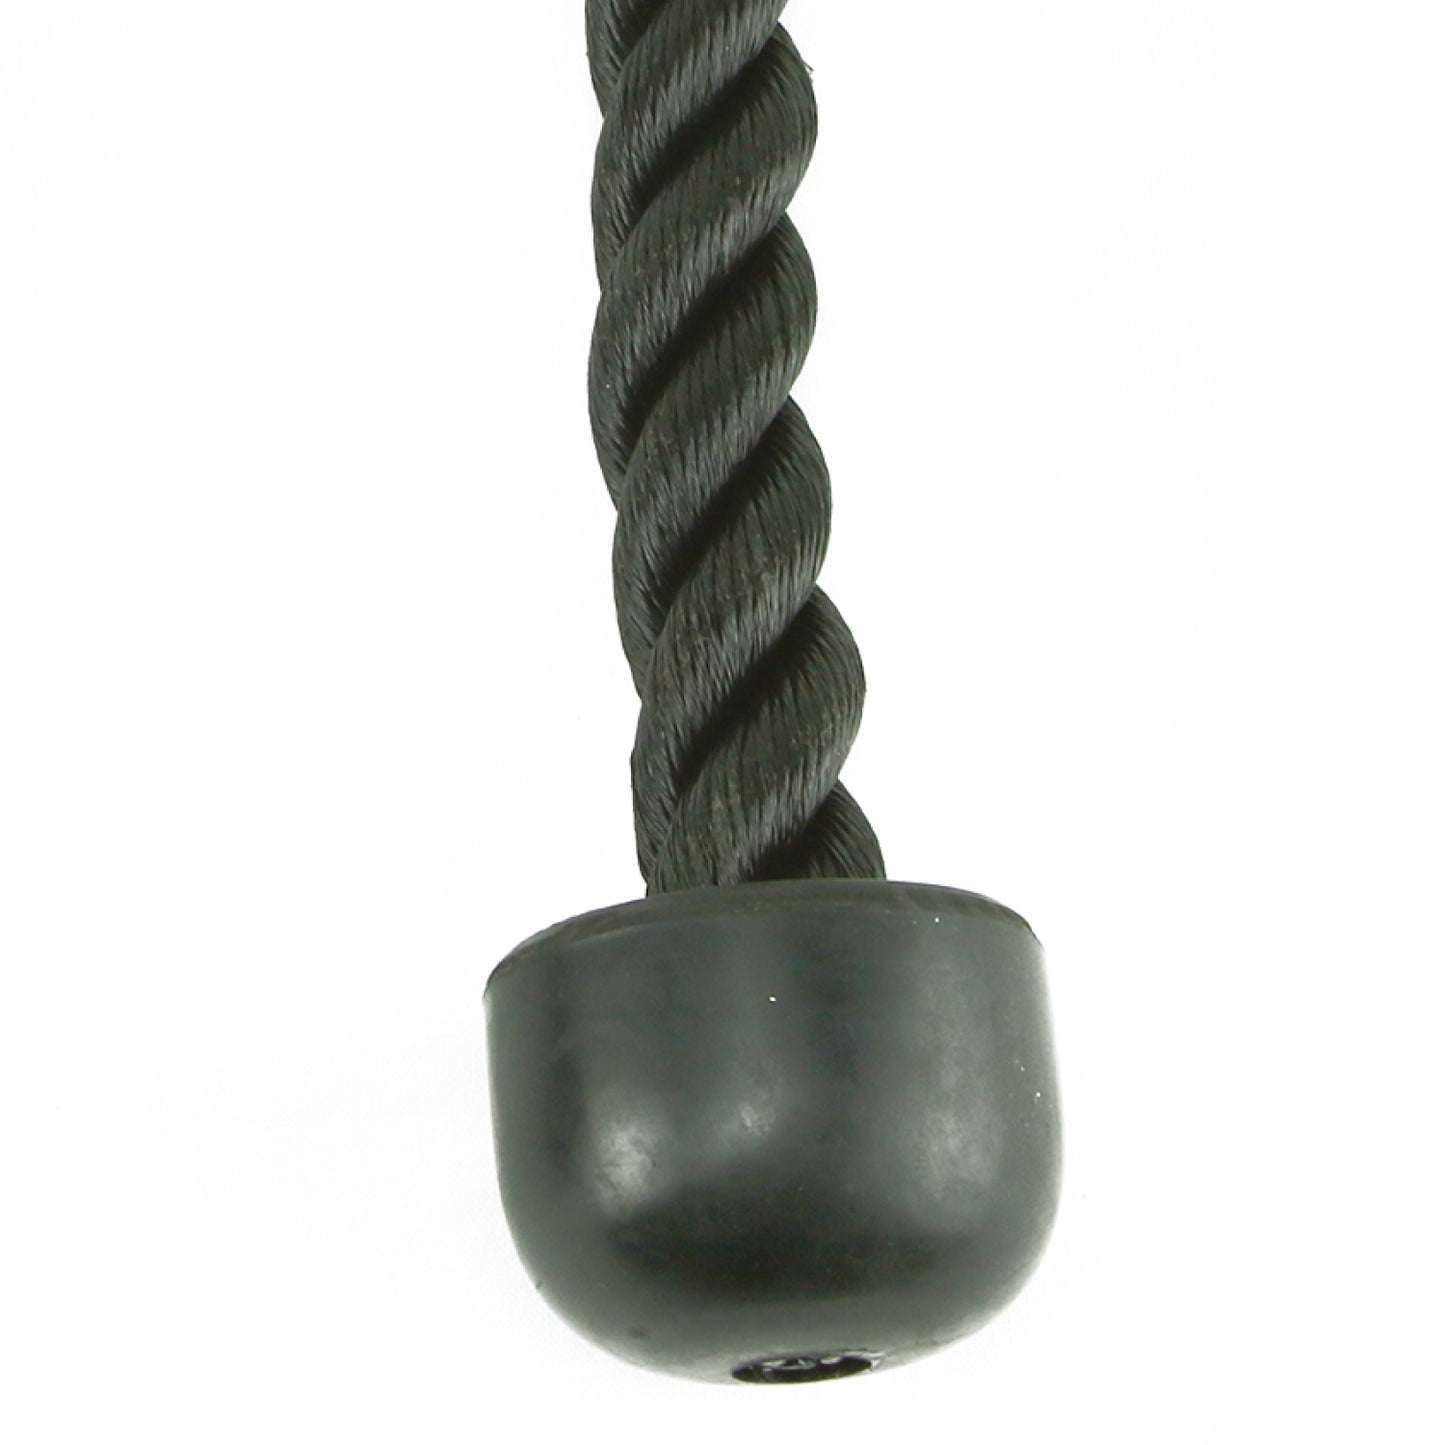 Rope handle (two hands)